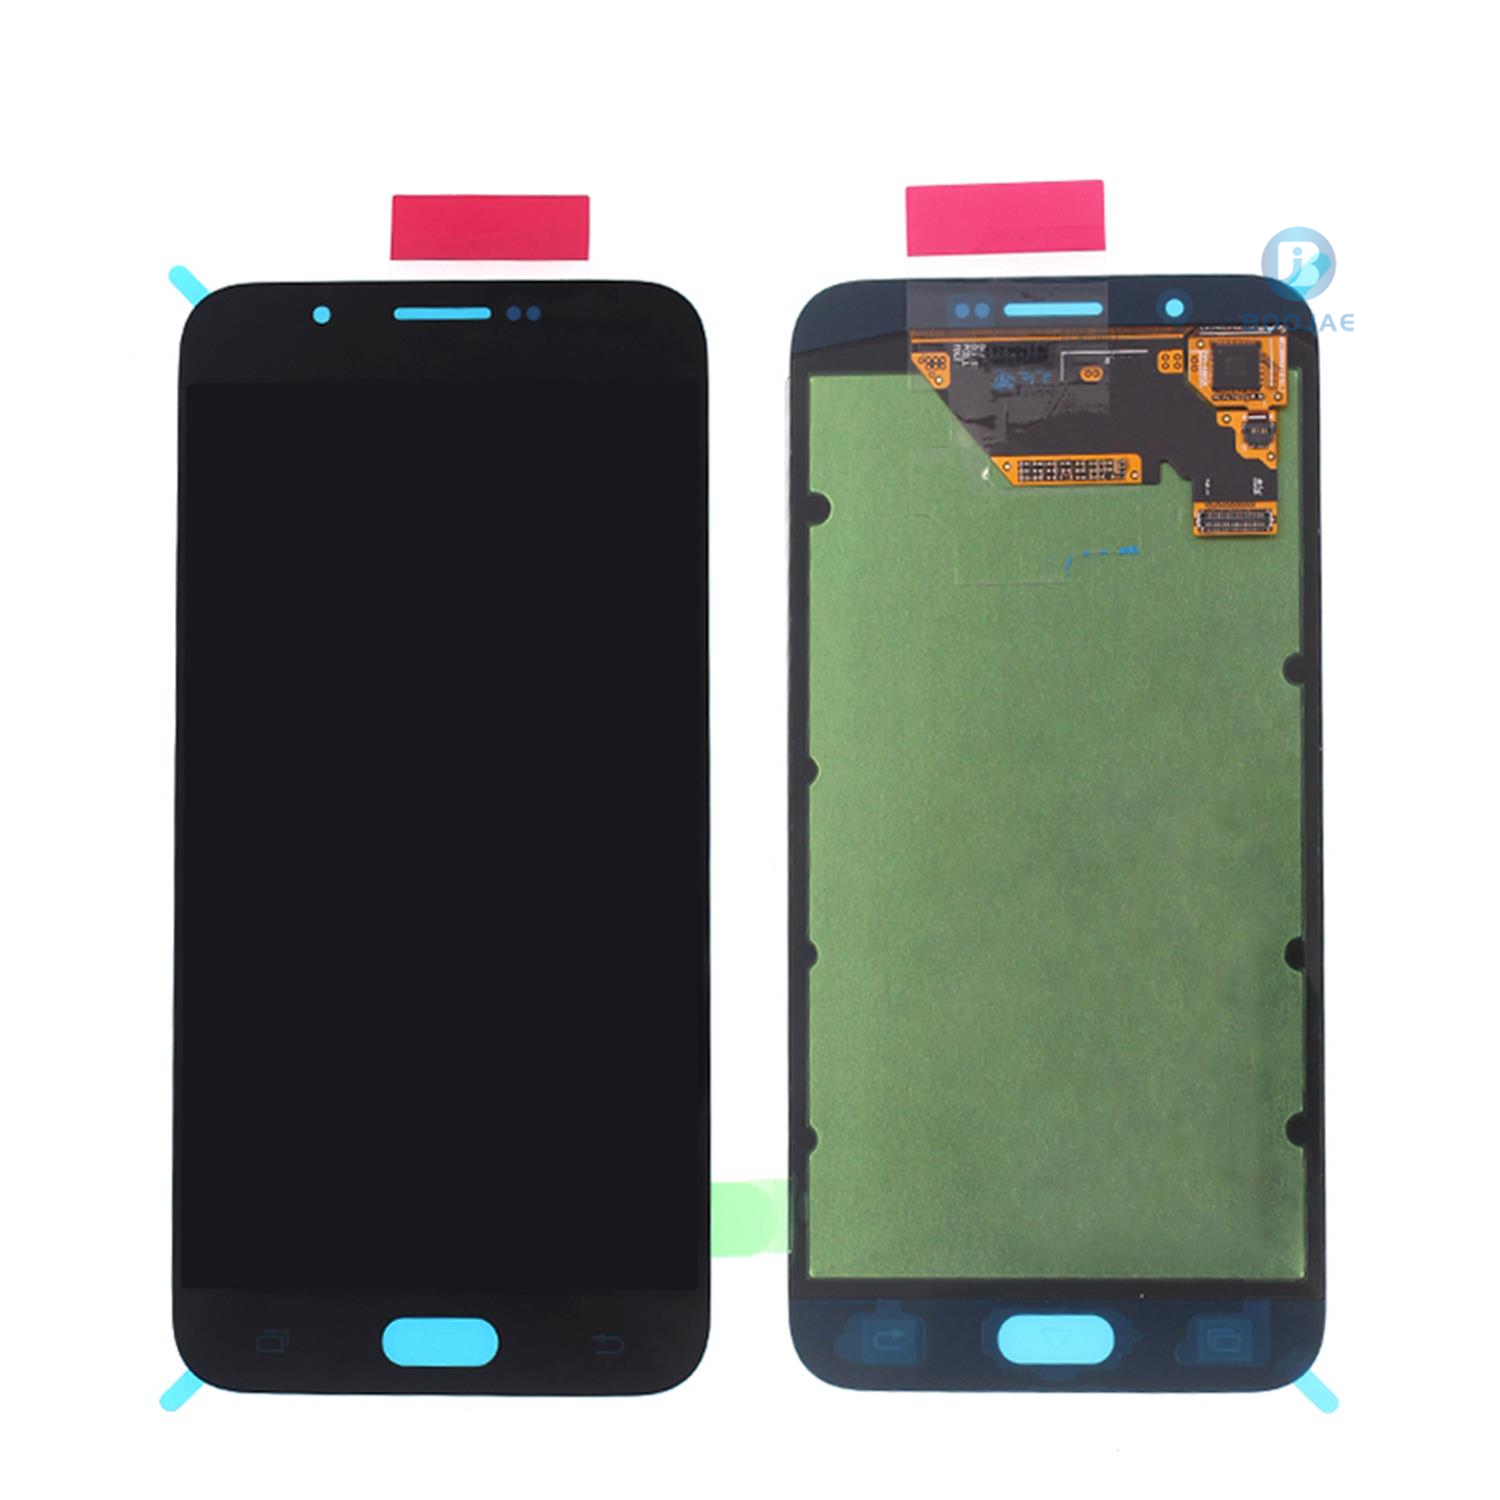 Samsung Galaxy A8 LCD Screen Display and Touch Panel Digitizer Assembly Replacement